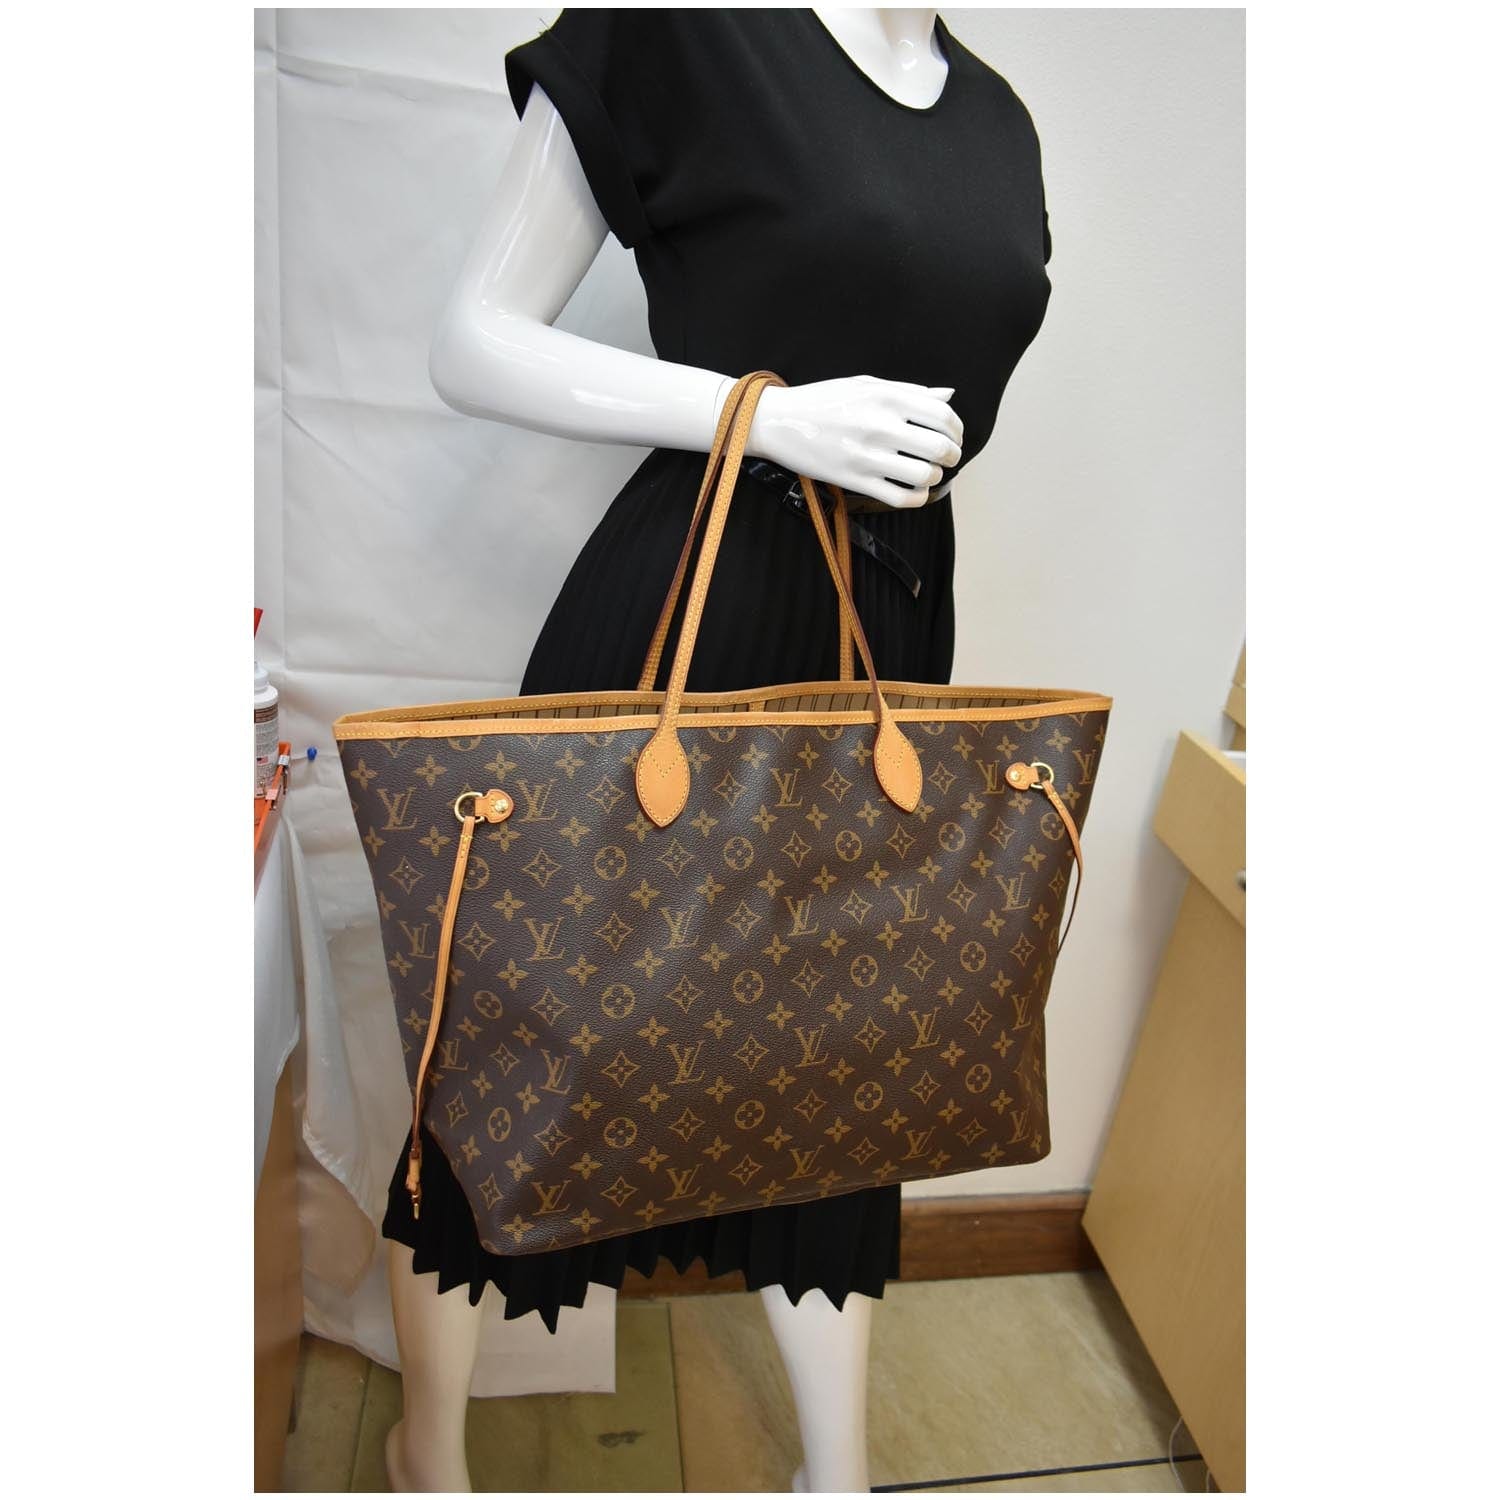 Louis Vuitton Neverfull Gm Tote Bag Tan - $1394 - From Ava